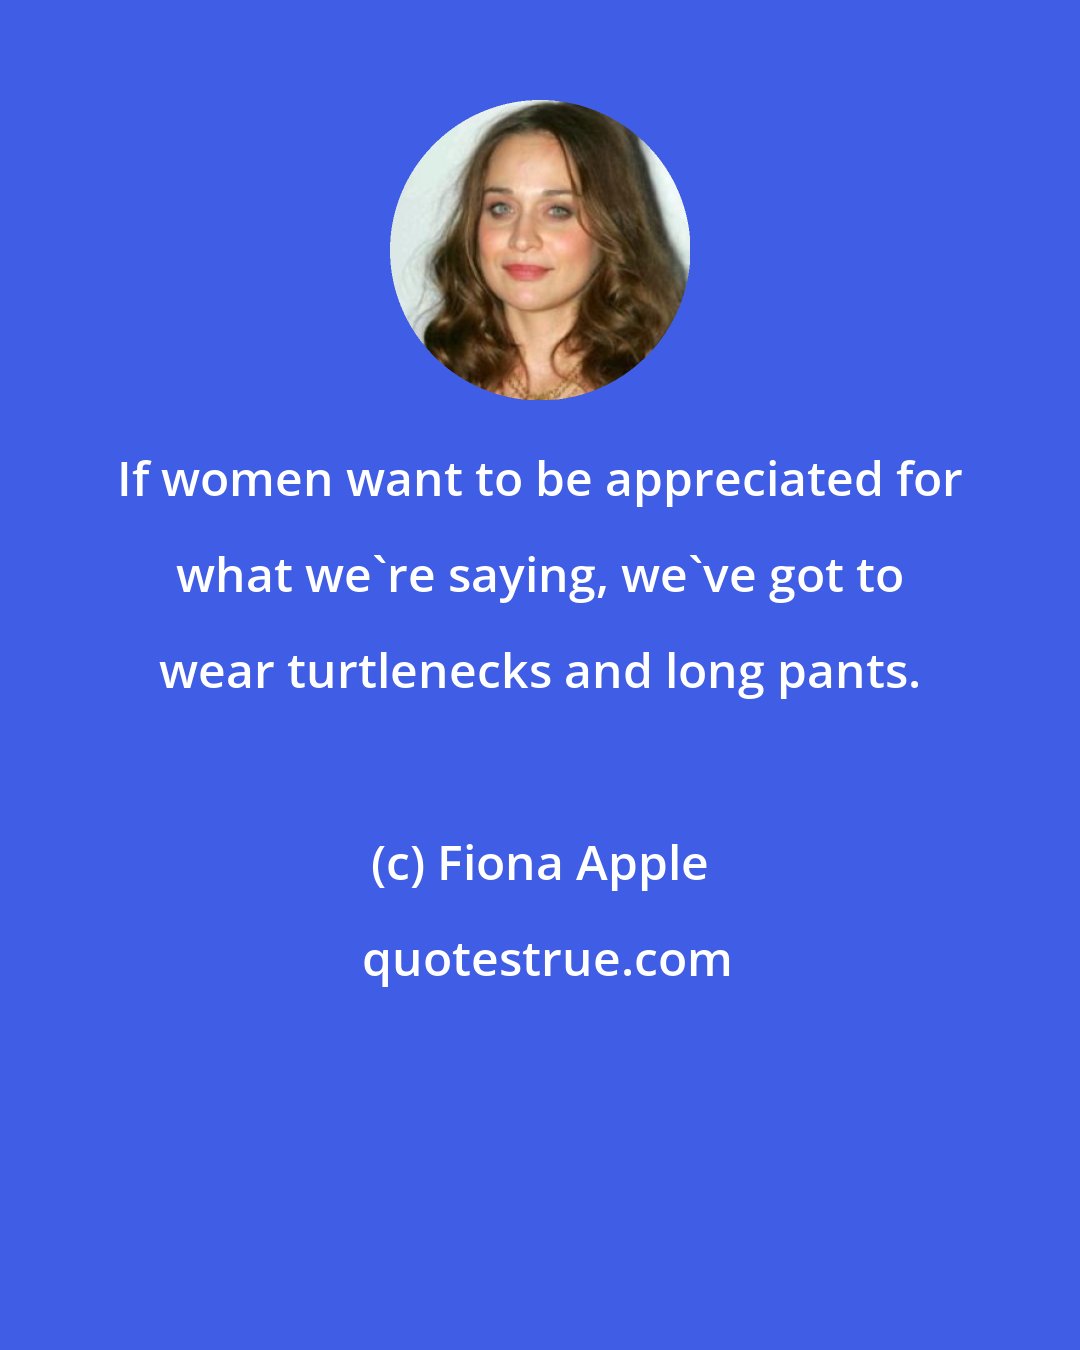 Fiona Apple: If women want to be appreciated for what we're saying, we've got to wear turtlenecks and long pants.